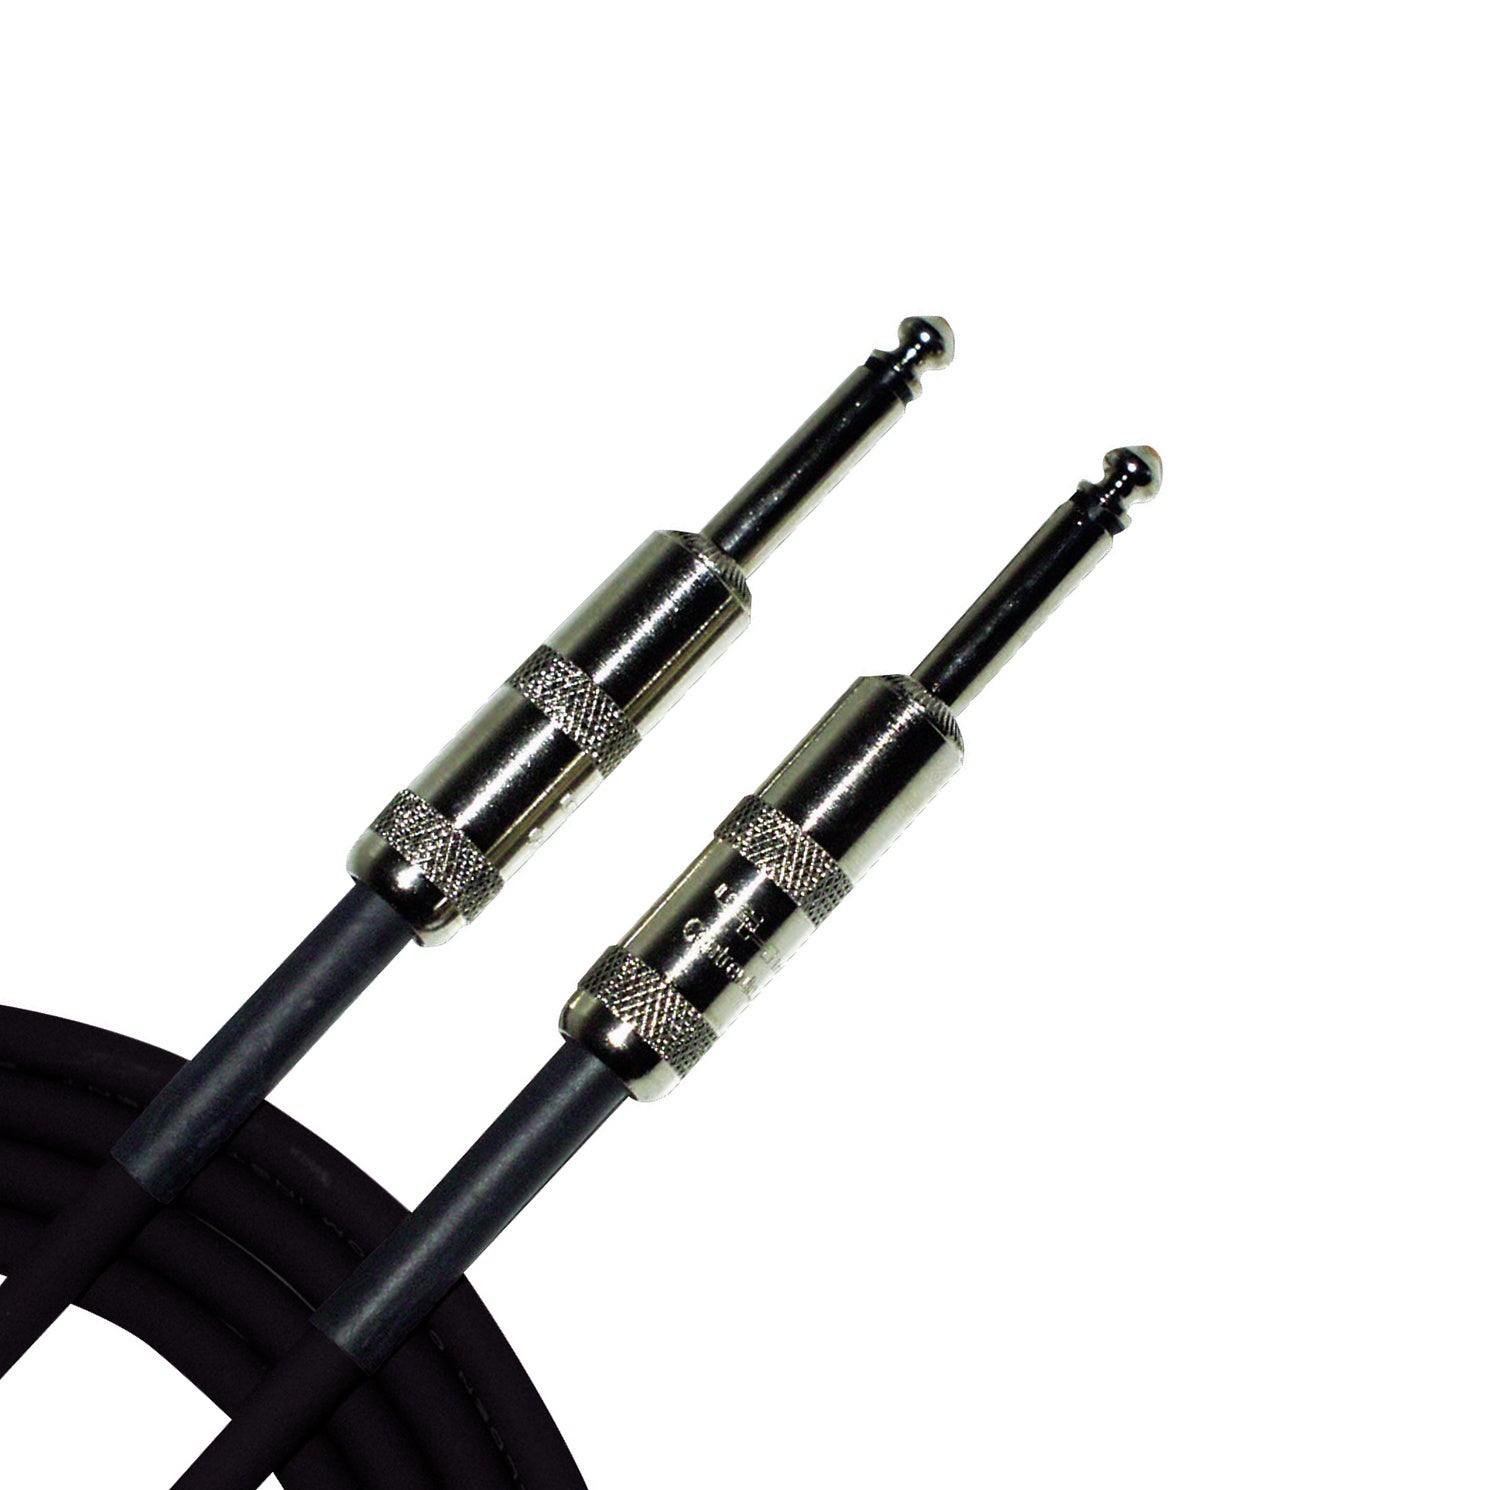 CBI GA1 American-Made Instrument Cable with Straight Plugs, 3 Foot